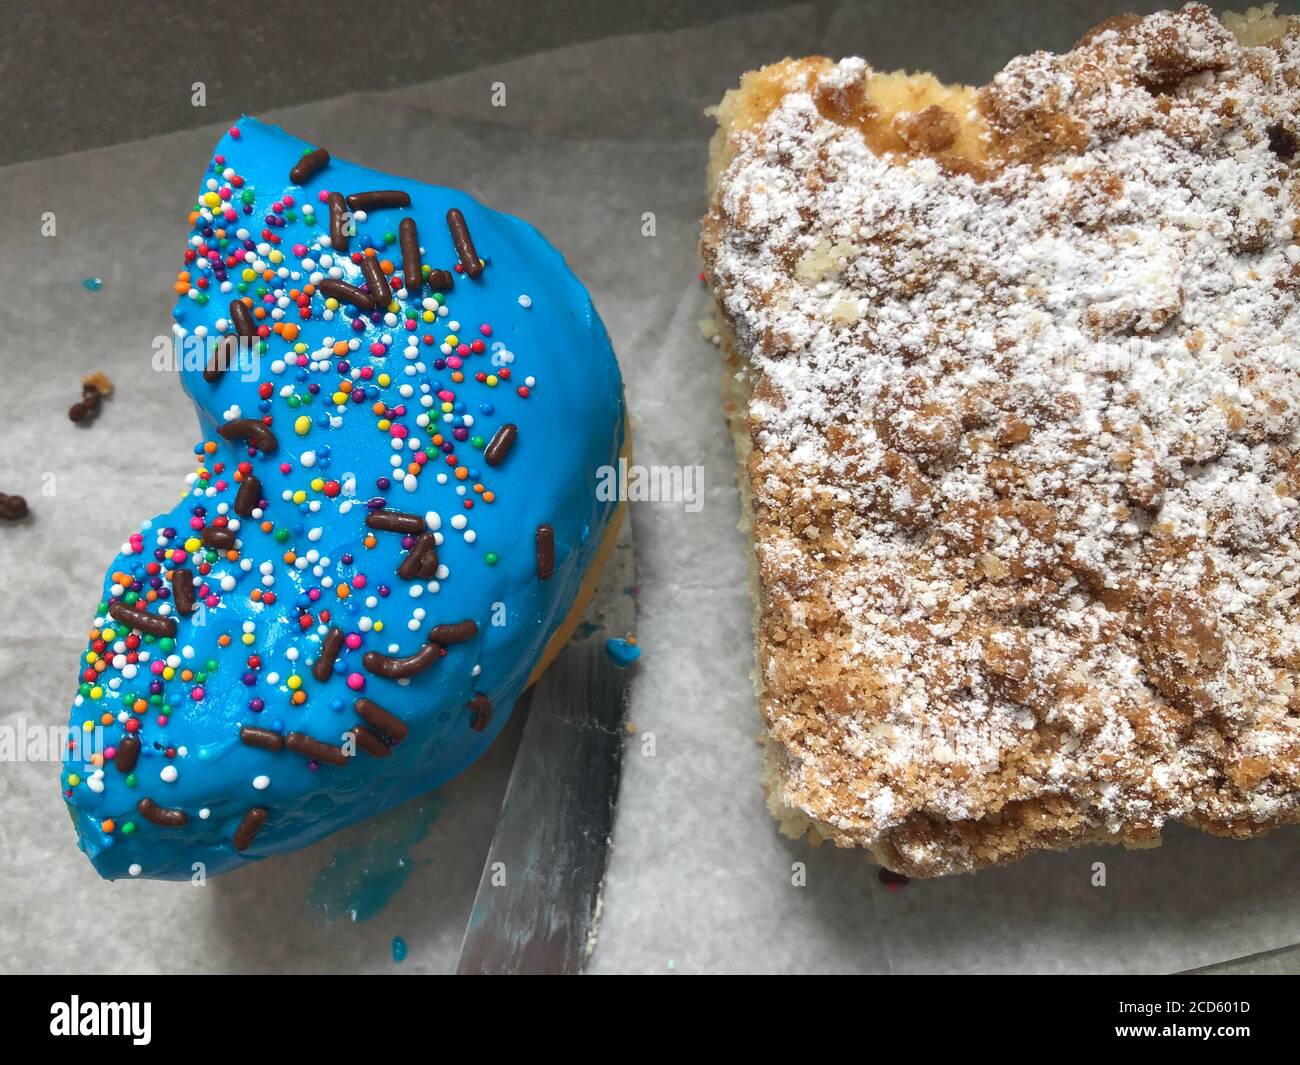 Sugary blue icing donut and cakes on table Stock Photo